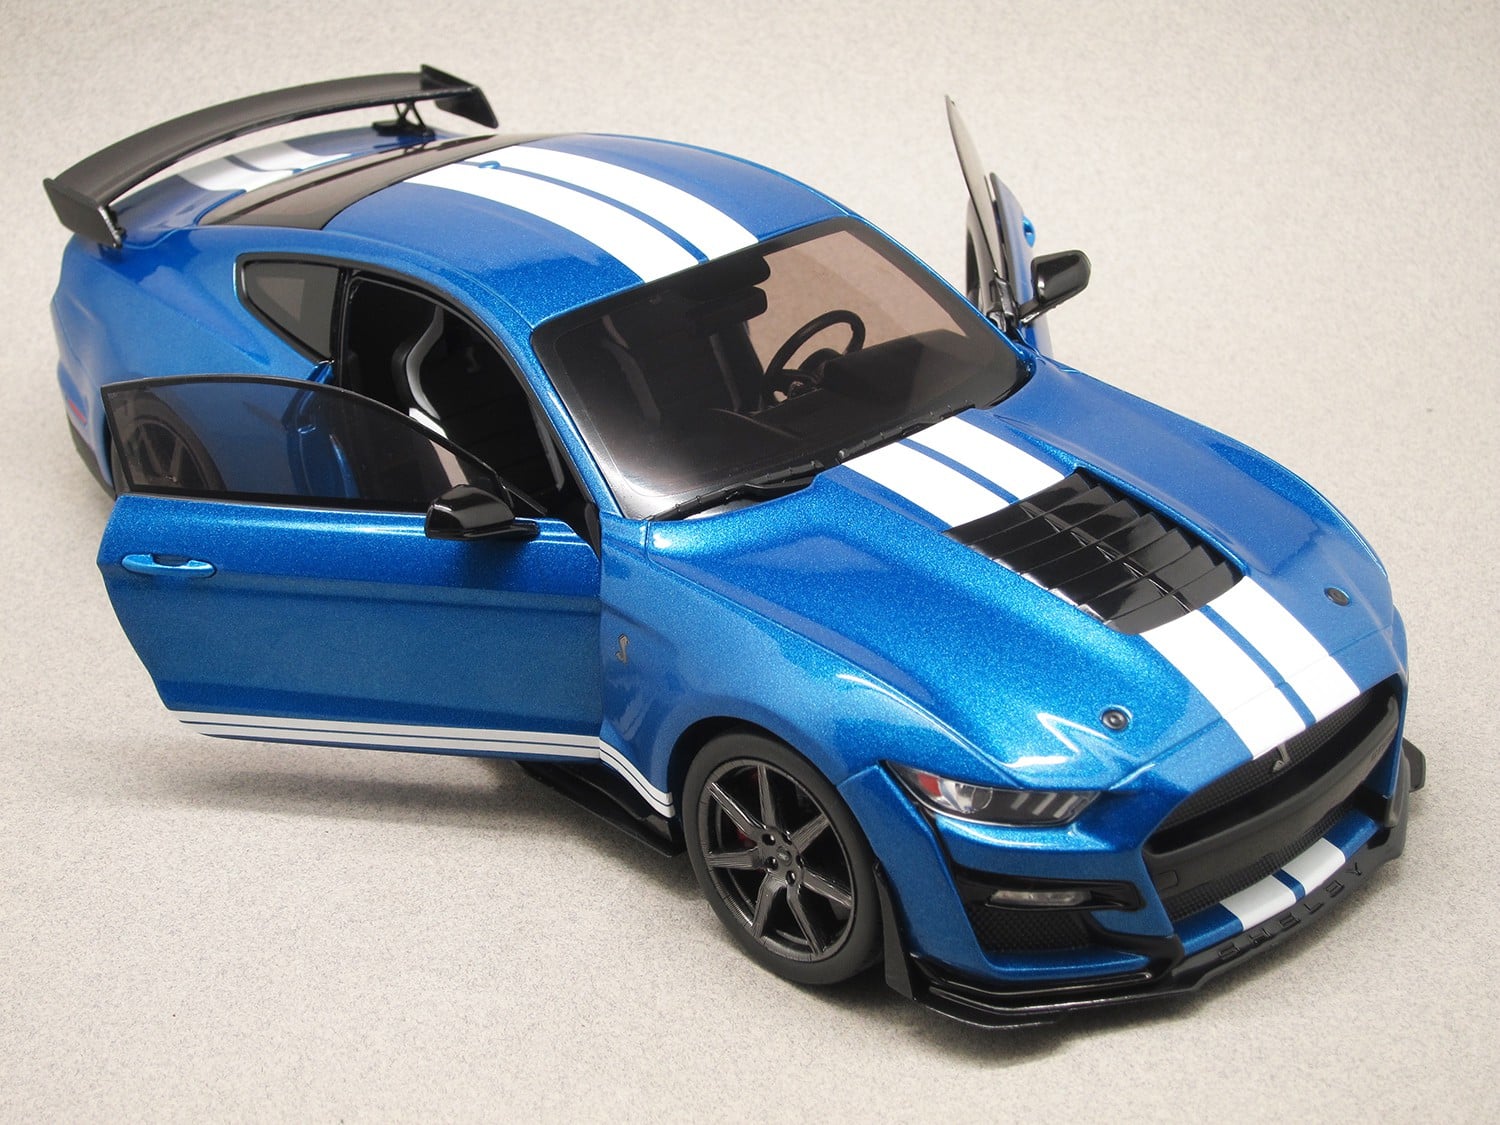 Ford Mustang Shelby 500 GT 2019 (Solido) 1/18e